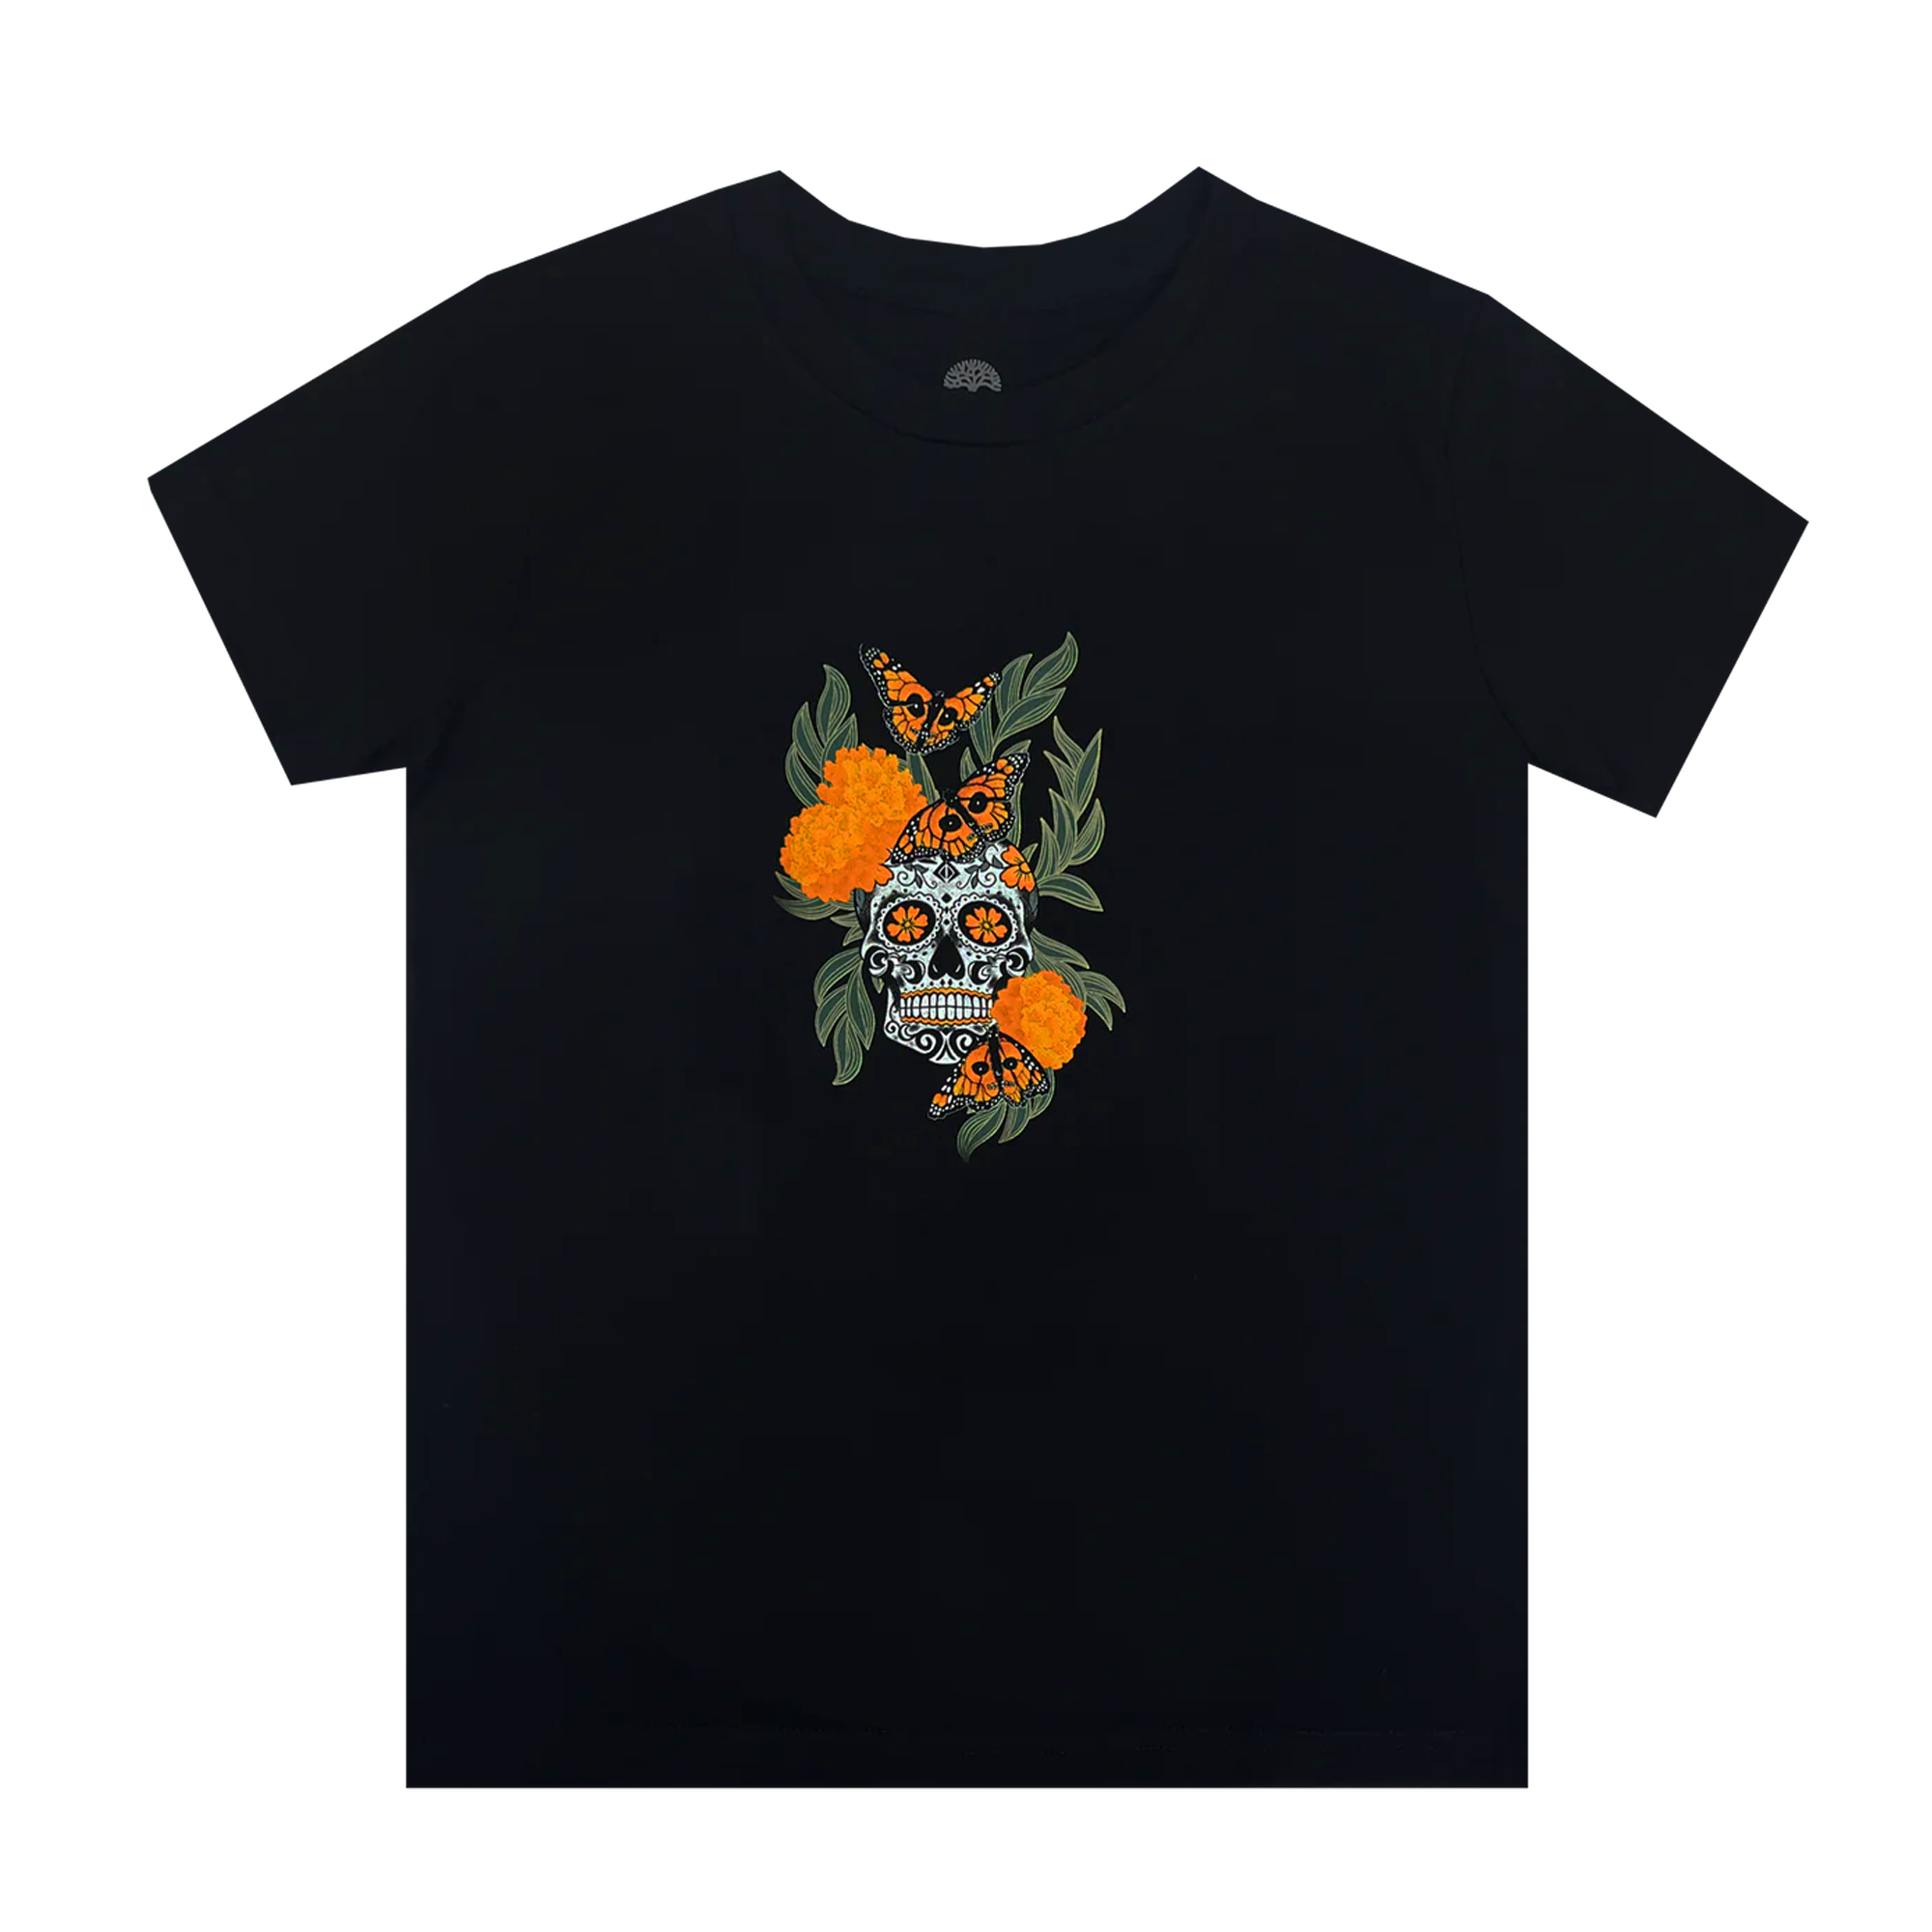 Black women’s t-shirt with graphic art by Oakland artist Jet Martinez depicting a sugar skull surrounded by Marigolds and Monarch butterflies.